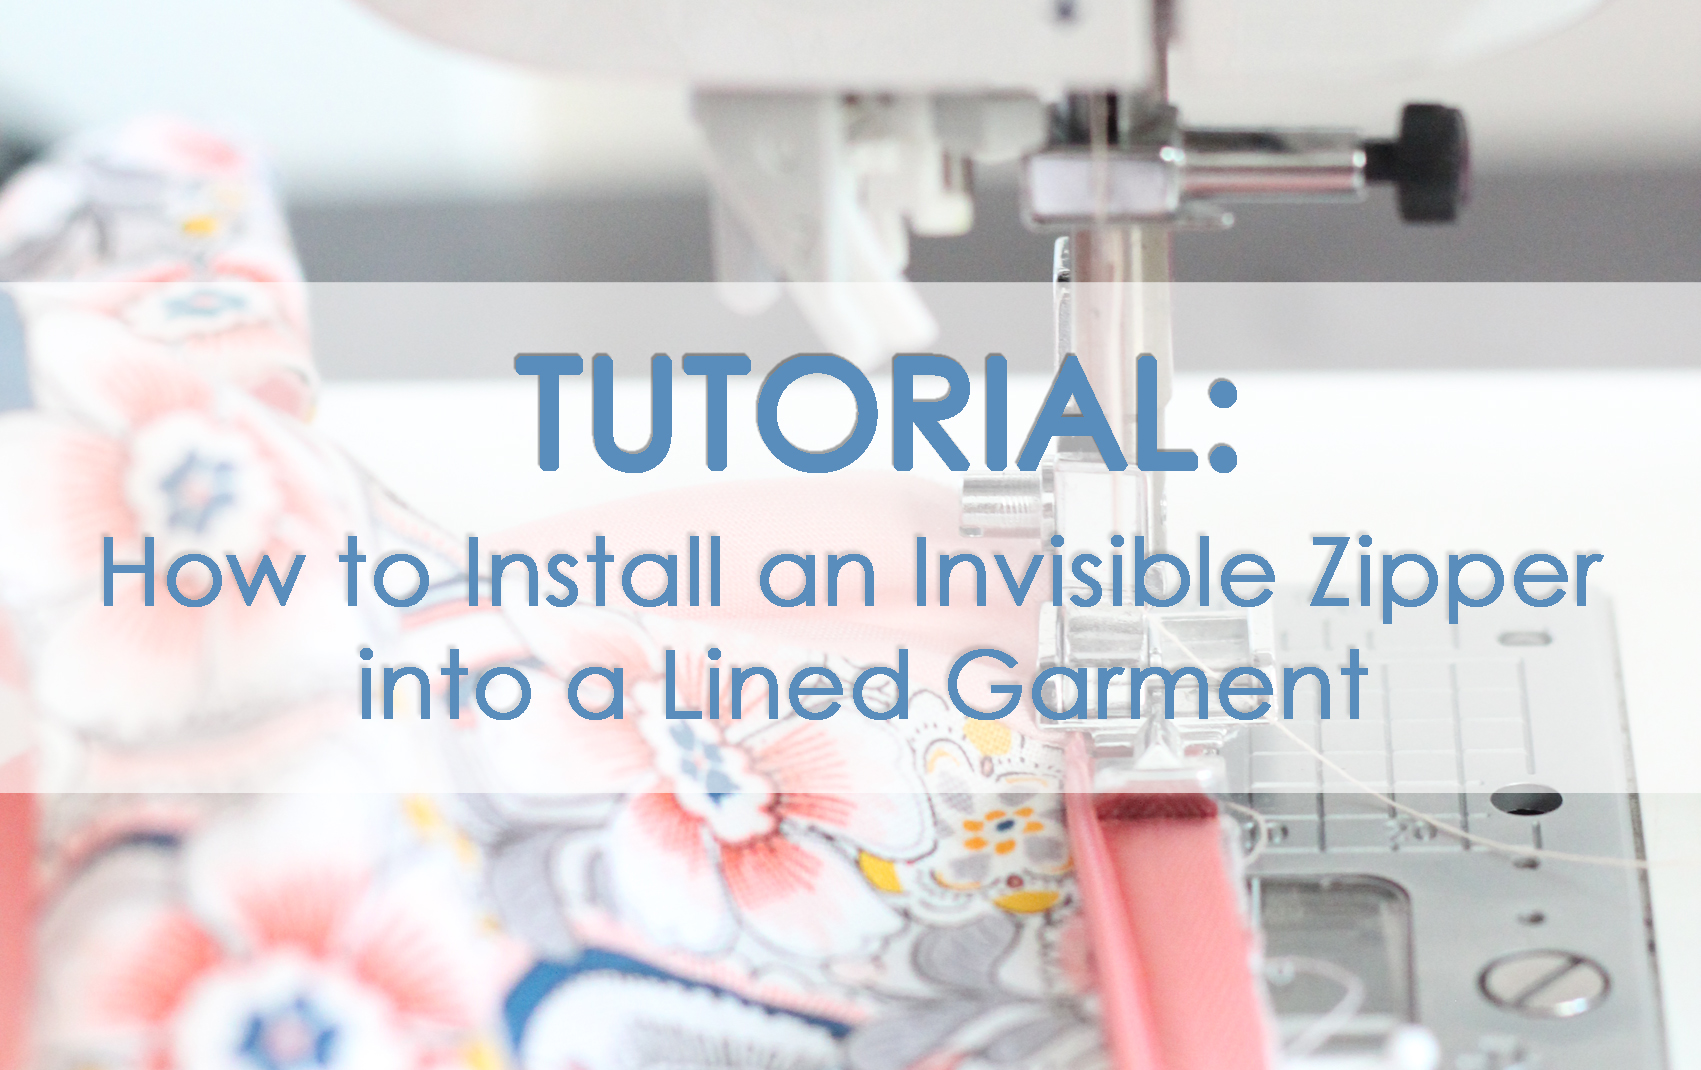 TUTORIAL: How to Install an Invisible Zipper in a Lined Garment by Candice Ayala